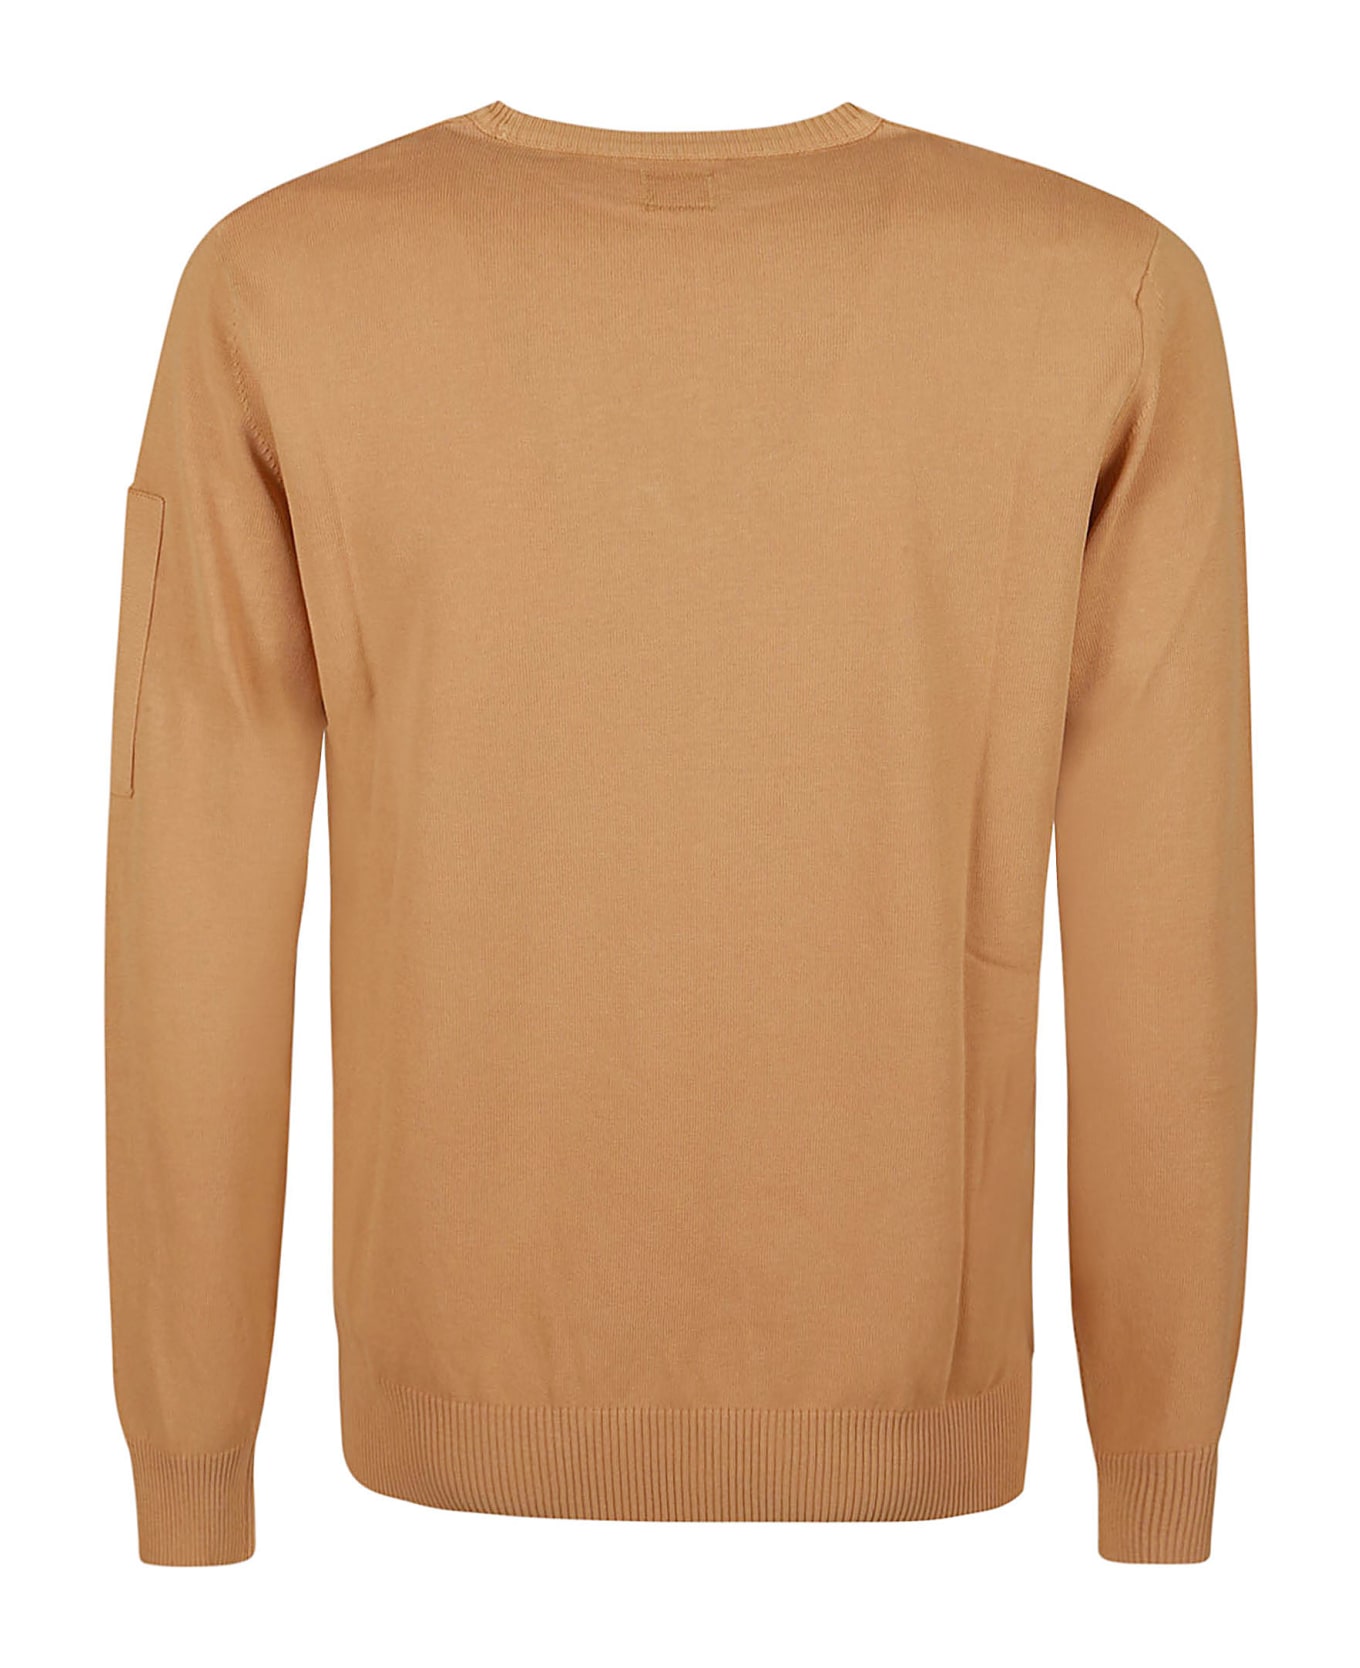 C.P. Company Old Dyed Crepe Sweatshirt - PASTRY SHELL